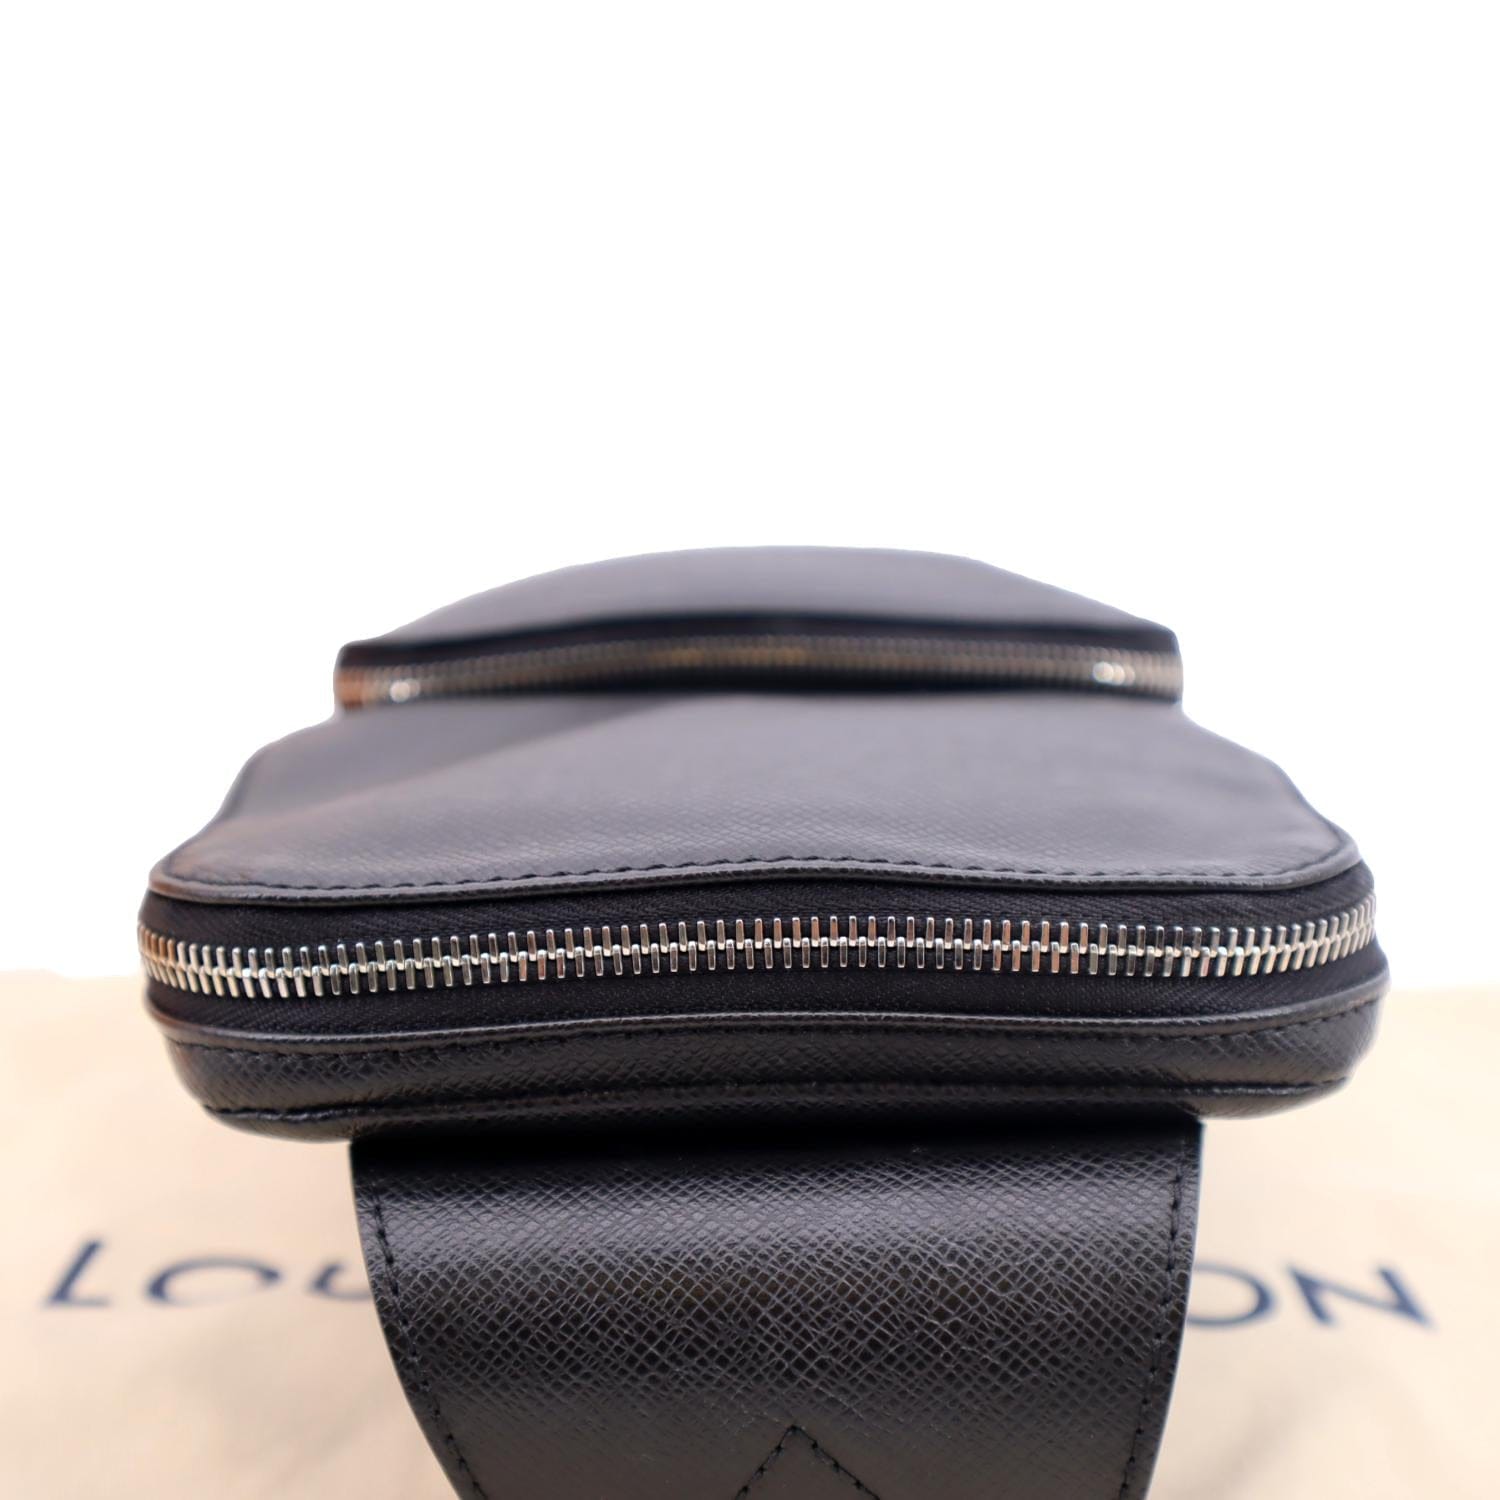 Louis Vuitton Avenue Sling Taiga Leather Backpack Bag